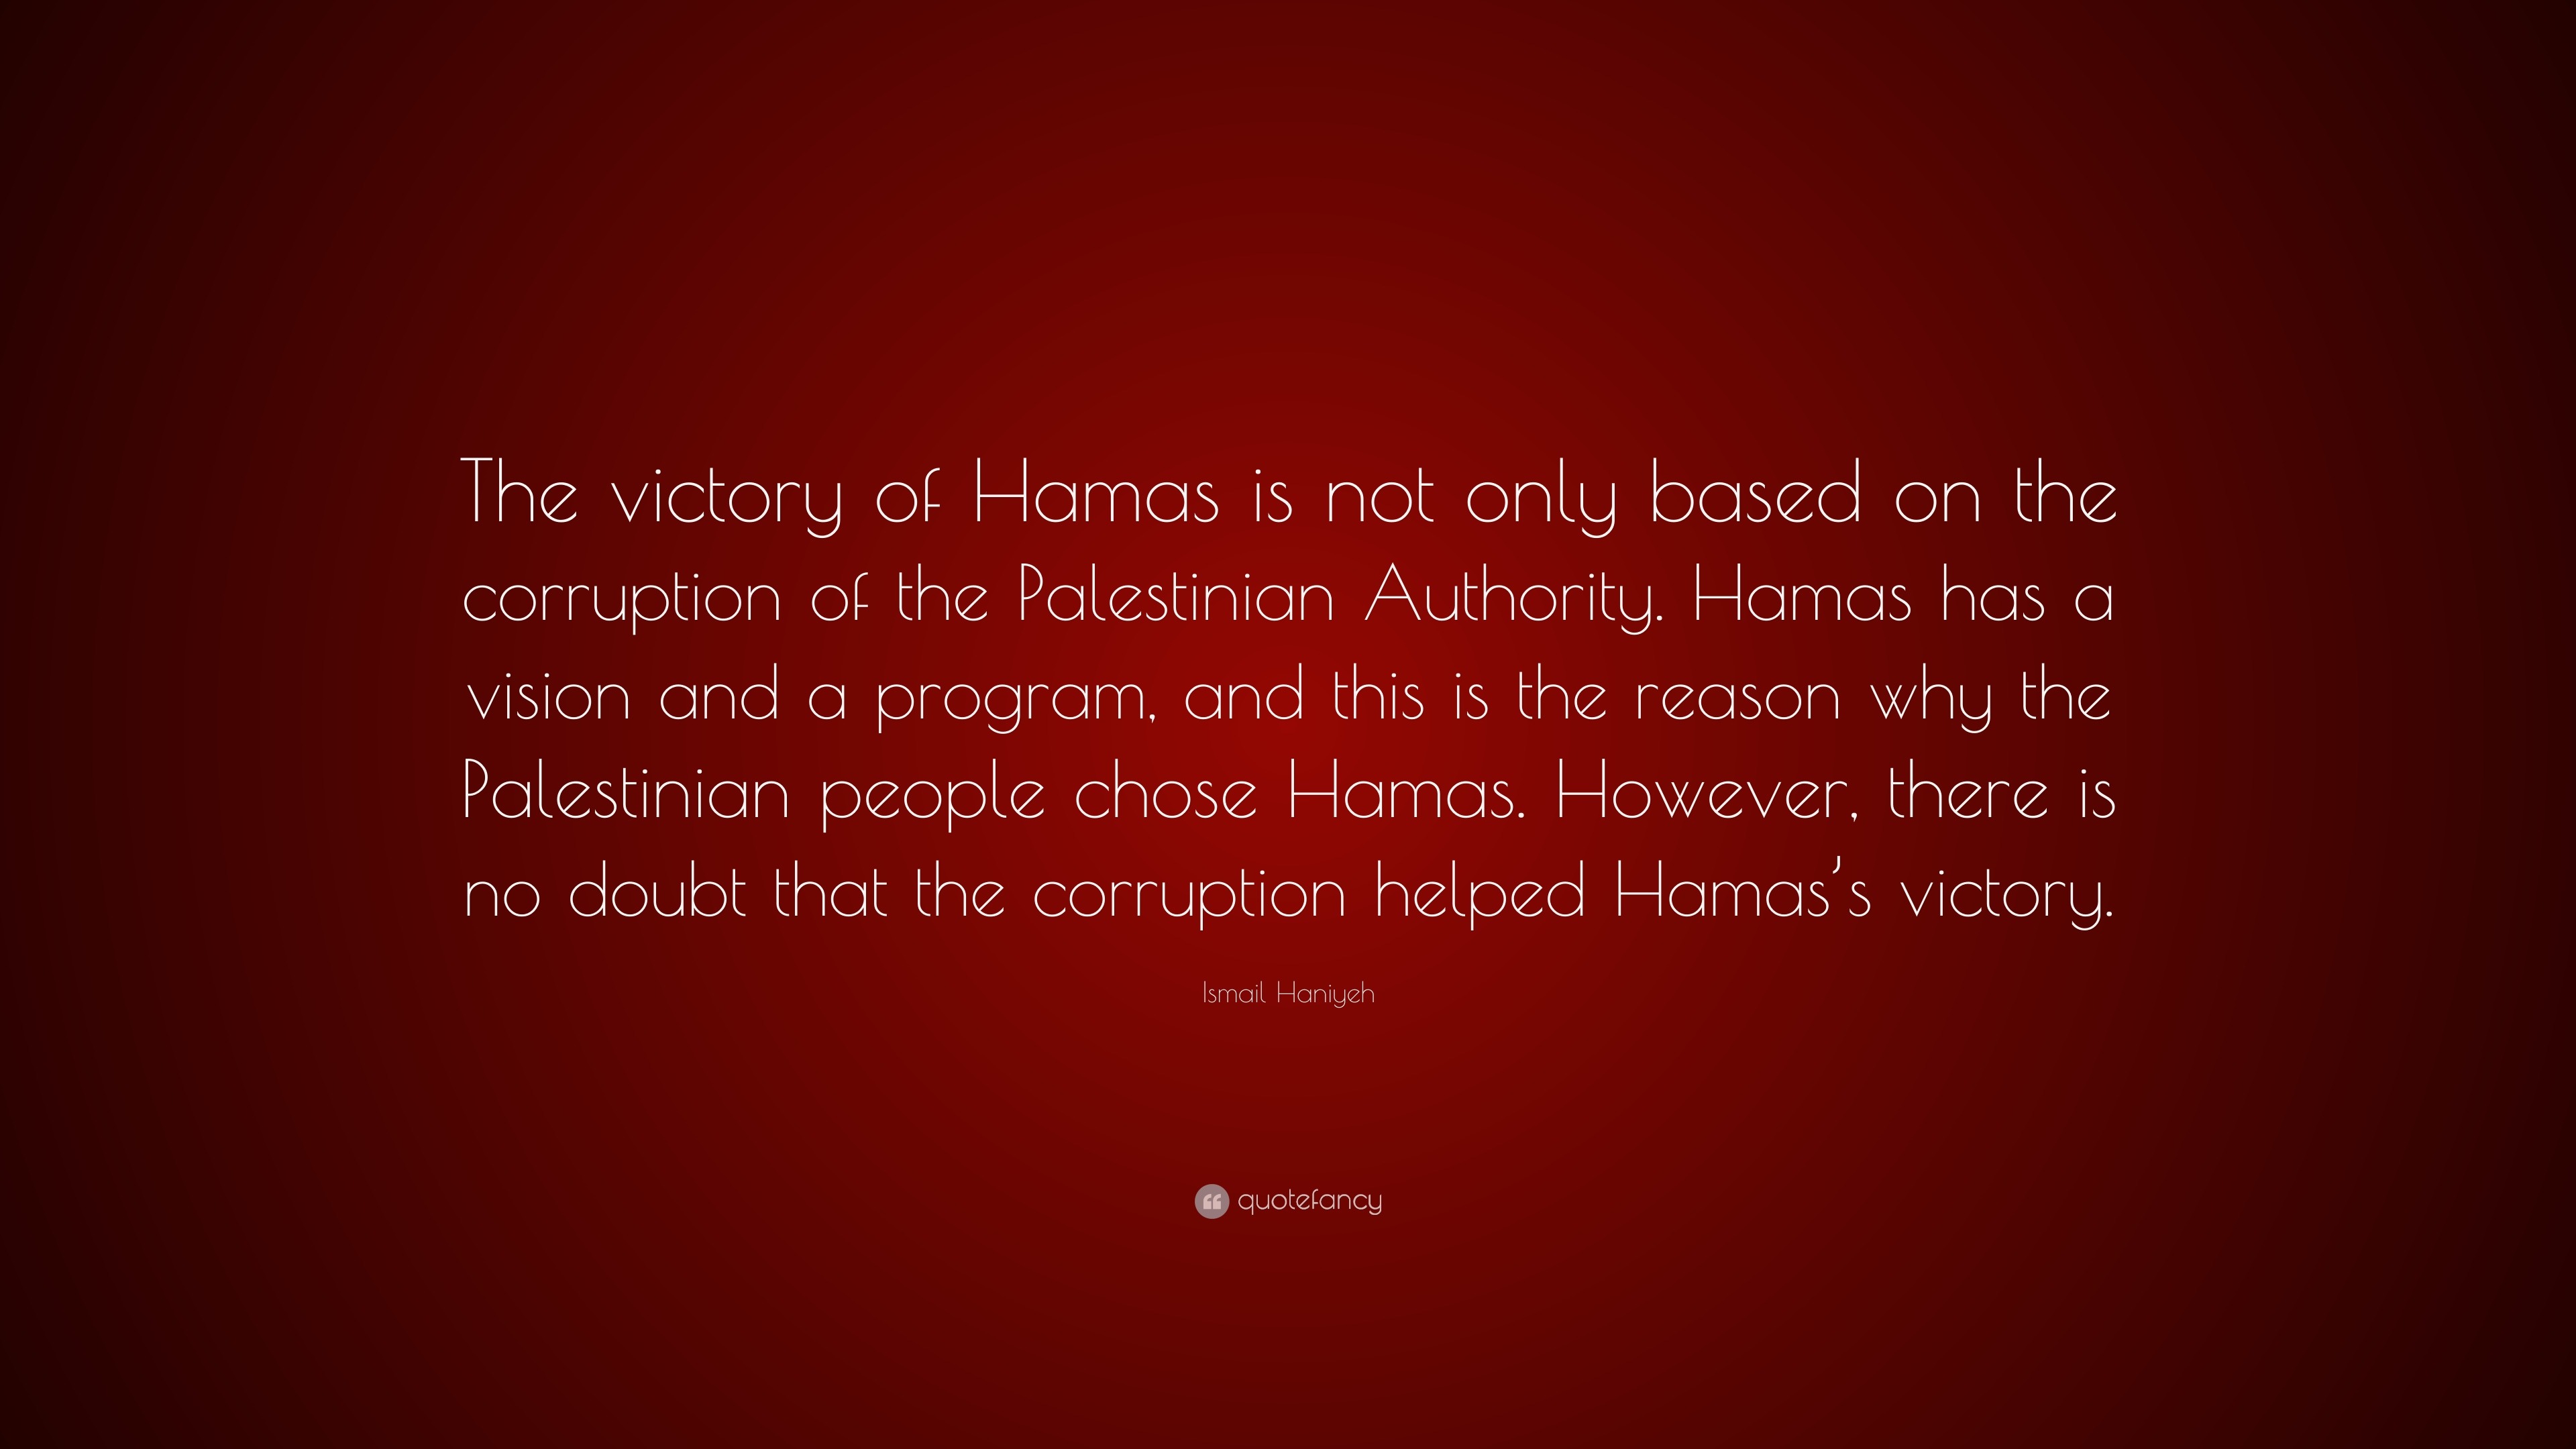 Ismail Haniyeh Quote “The victory of Hamas is not only based on the